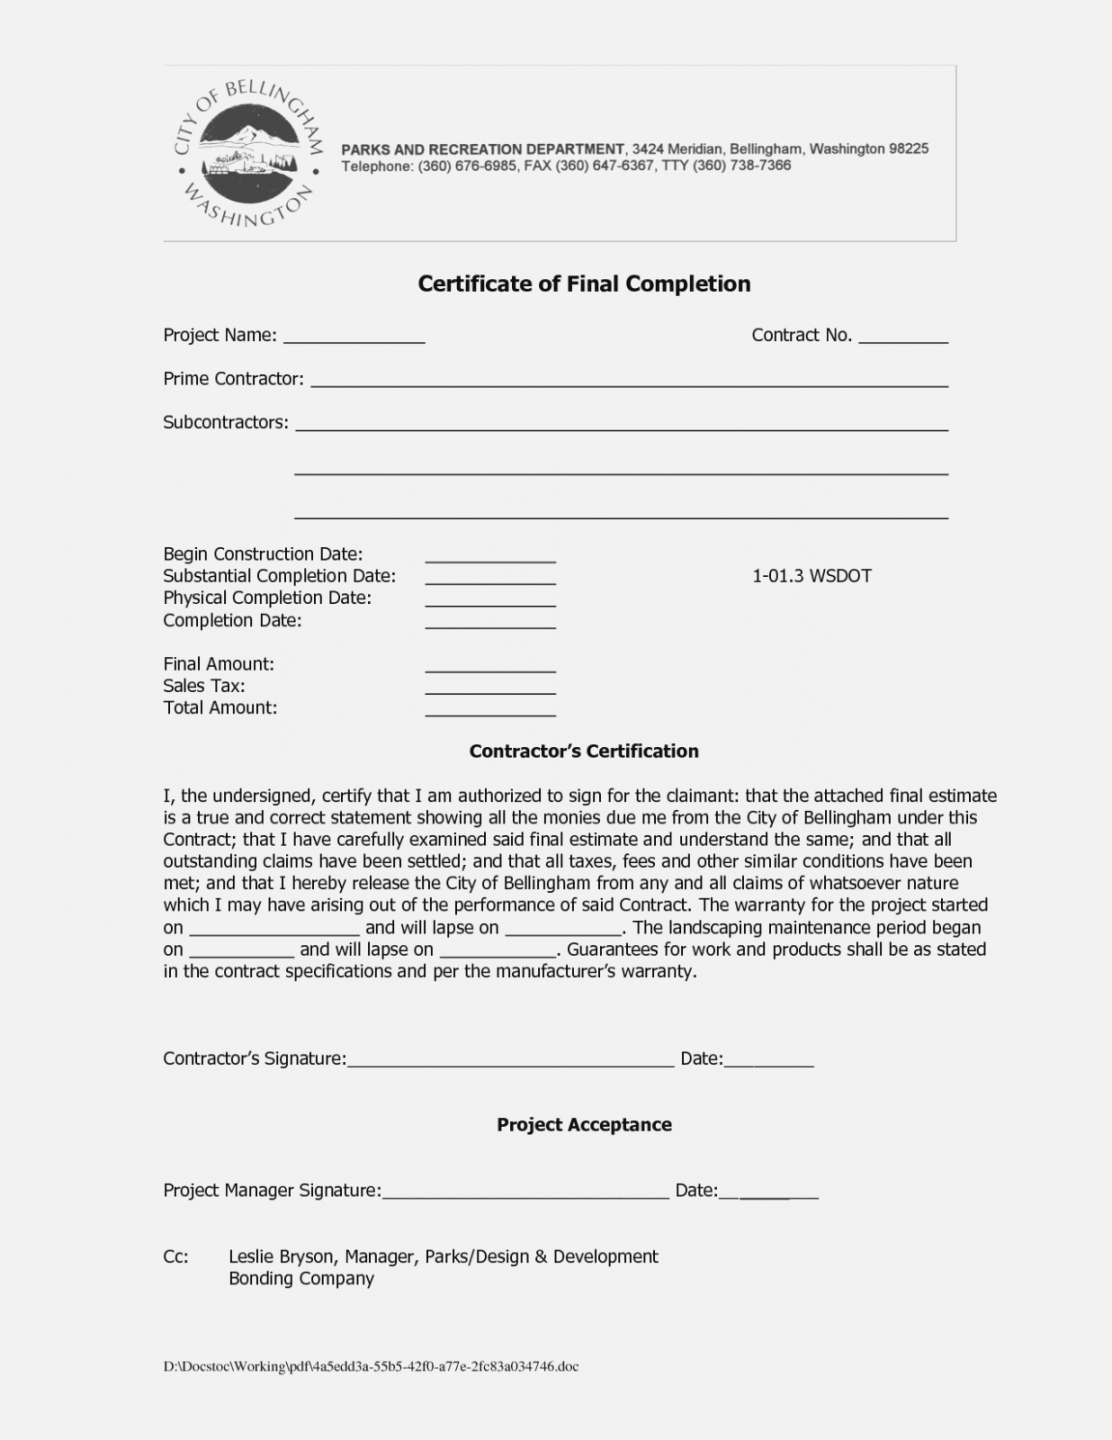 Roofing Certificate Of Completion Template – Zimer.bwong.co Pertaining To Certificate Of Completion Construction Templates